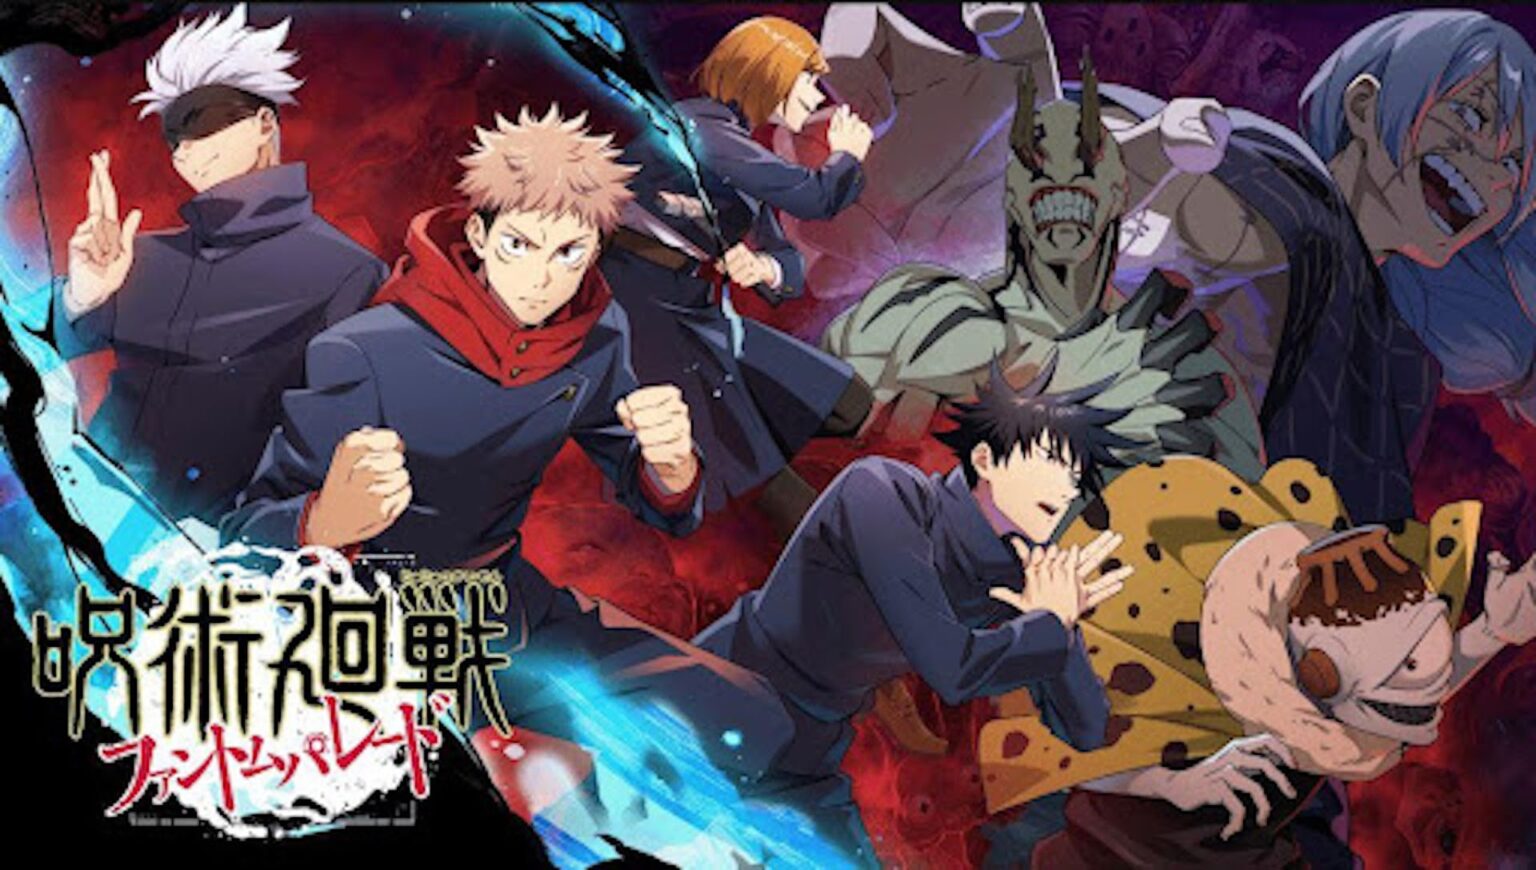 Jujutsu Kaisen 0 is almost here. Discover how to stream Crunchyroll's new anime action movie online for free!